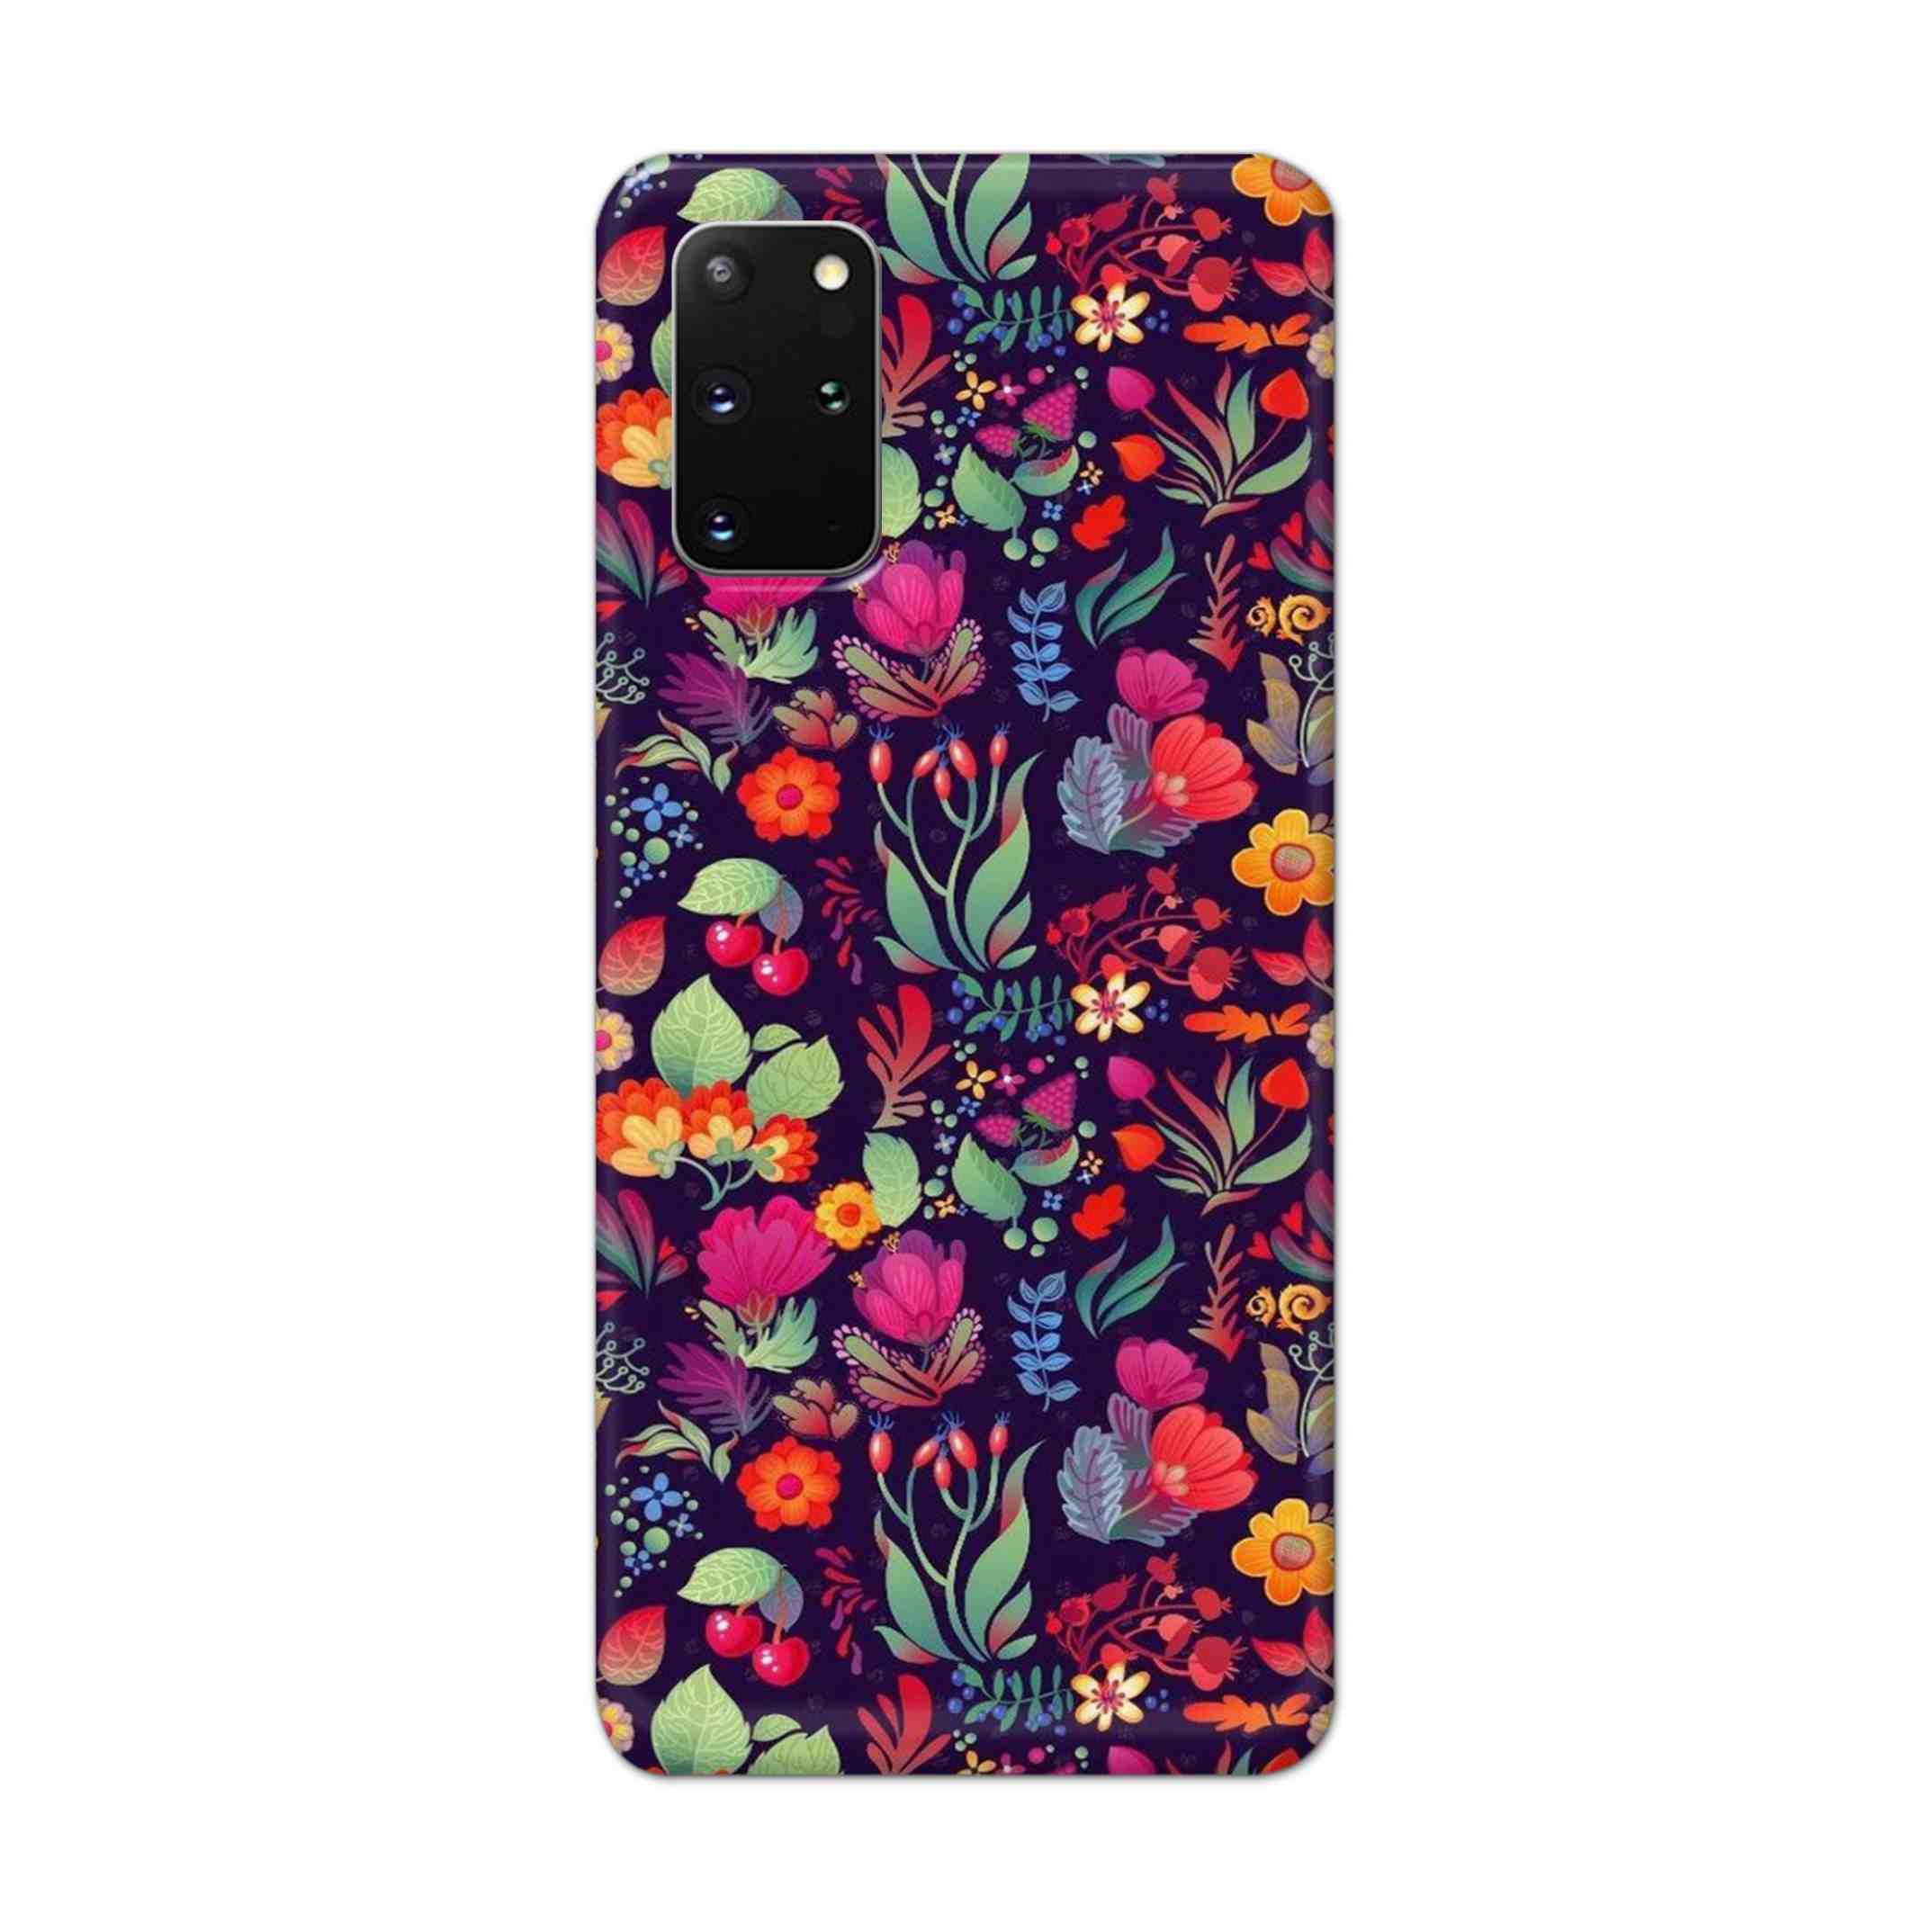 Buy Fruits Flower Hard Back Mobile Phone Case Cover For Samsung Galaxy S20 Plus Online